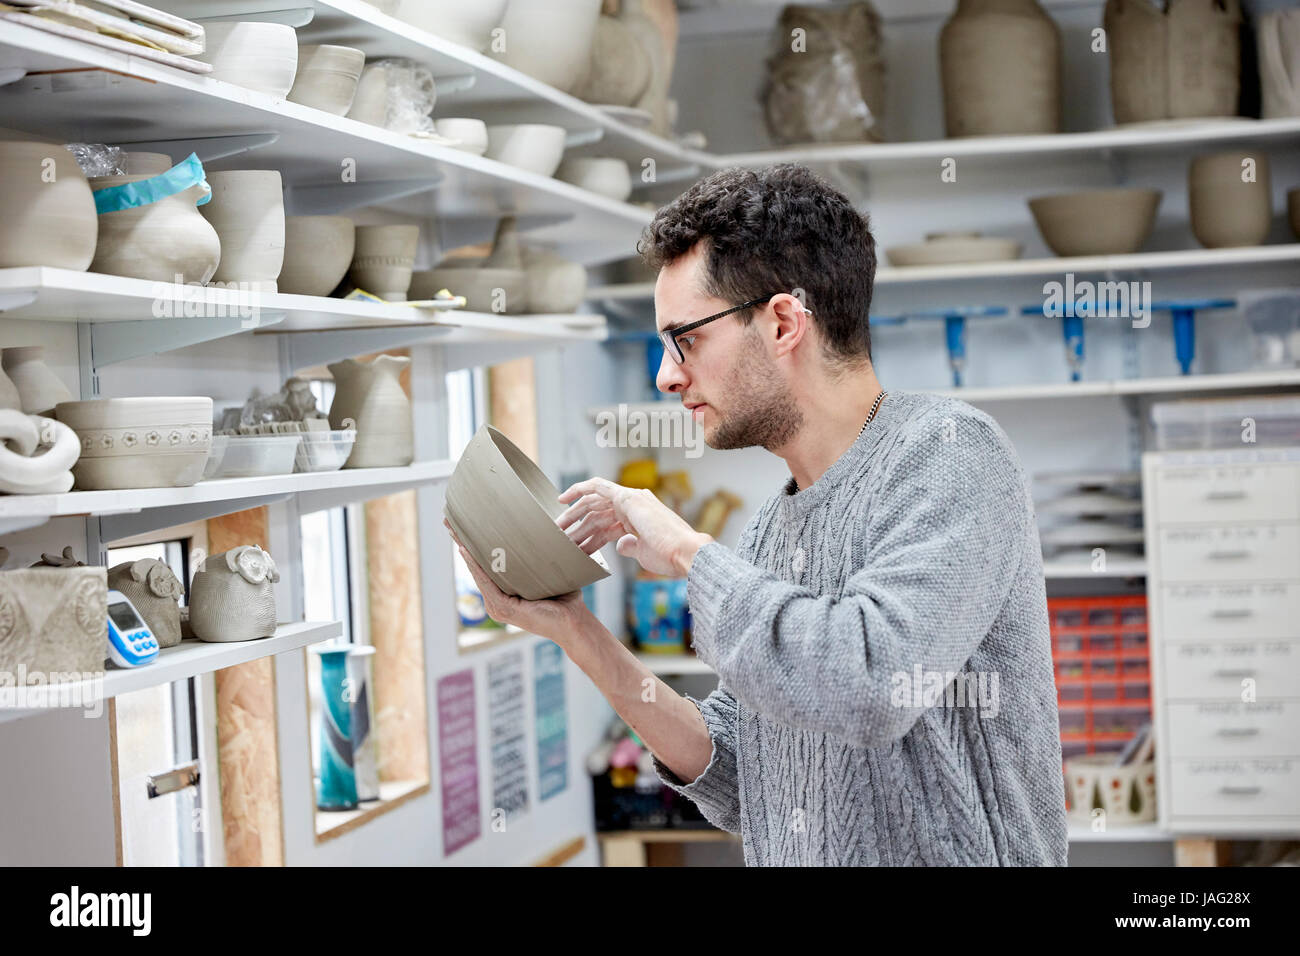 A man inspecting a clay pot, before firing. Shelves in a pottery studio full of pots, work in progress. Stock Photo